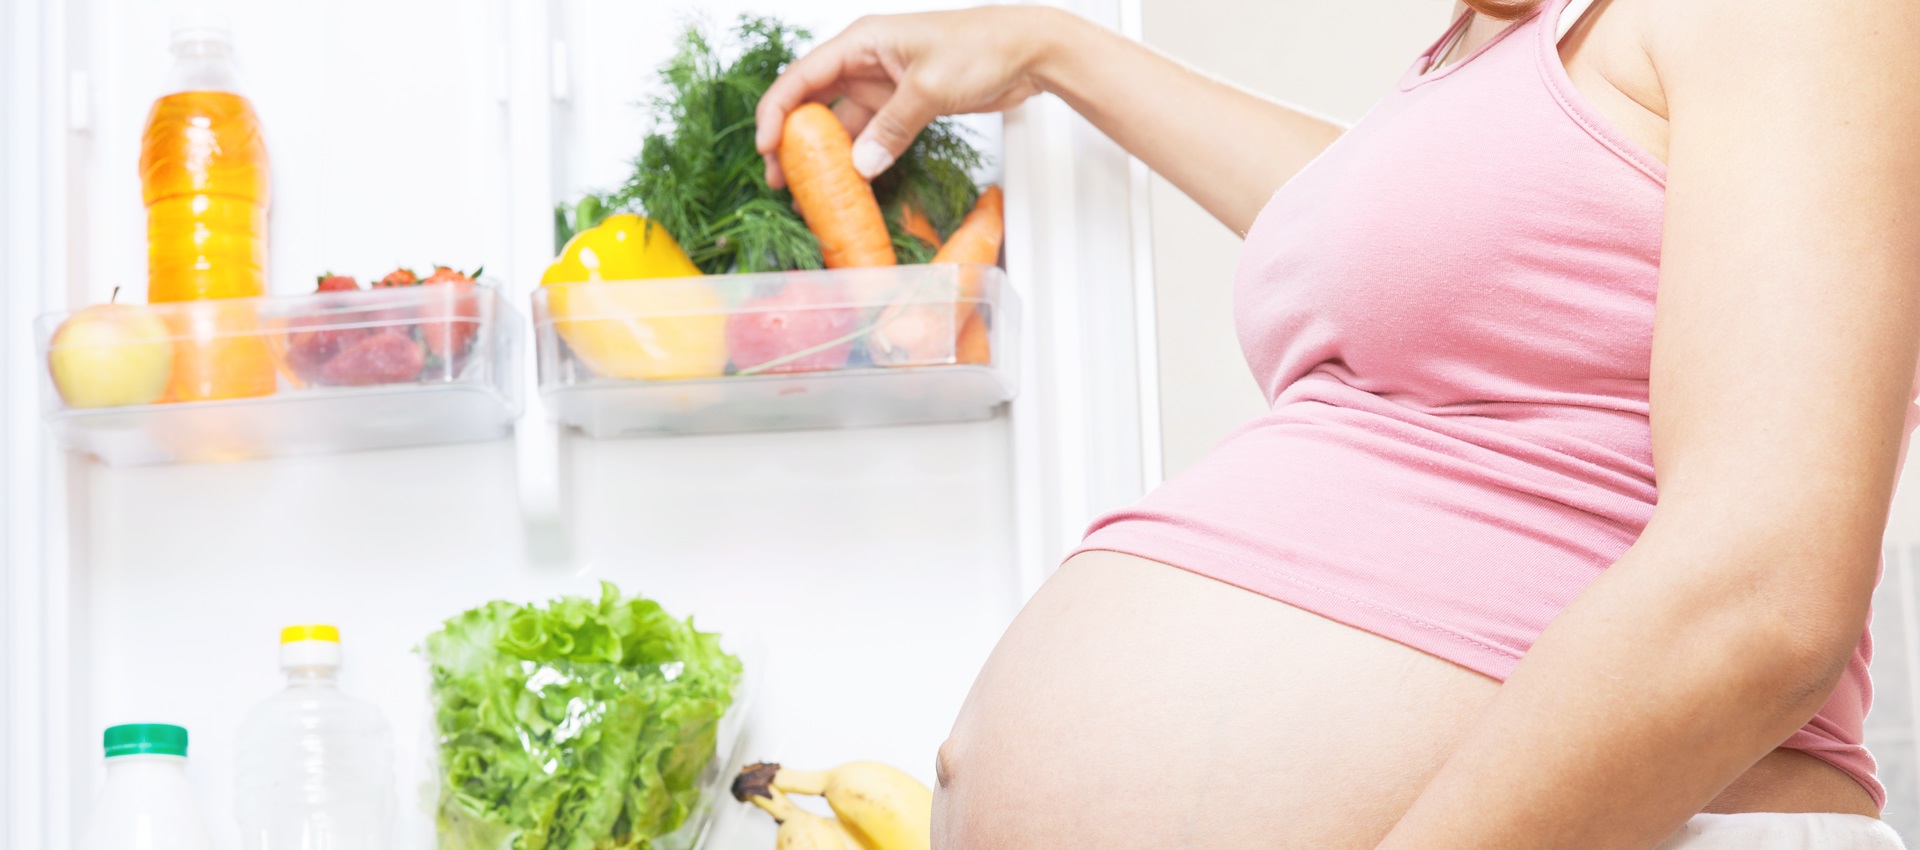 Dear mothers-to-be, here is your best pregnancy food  